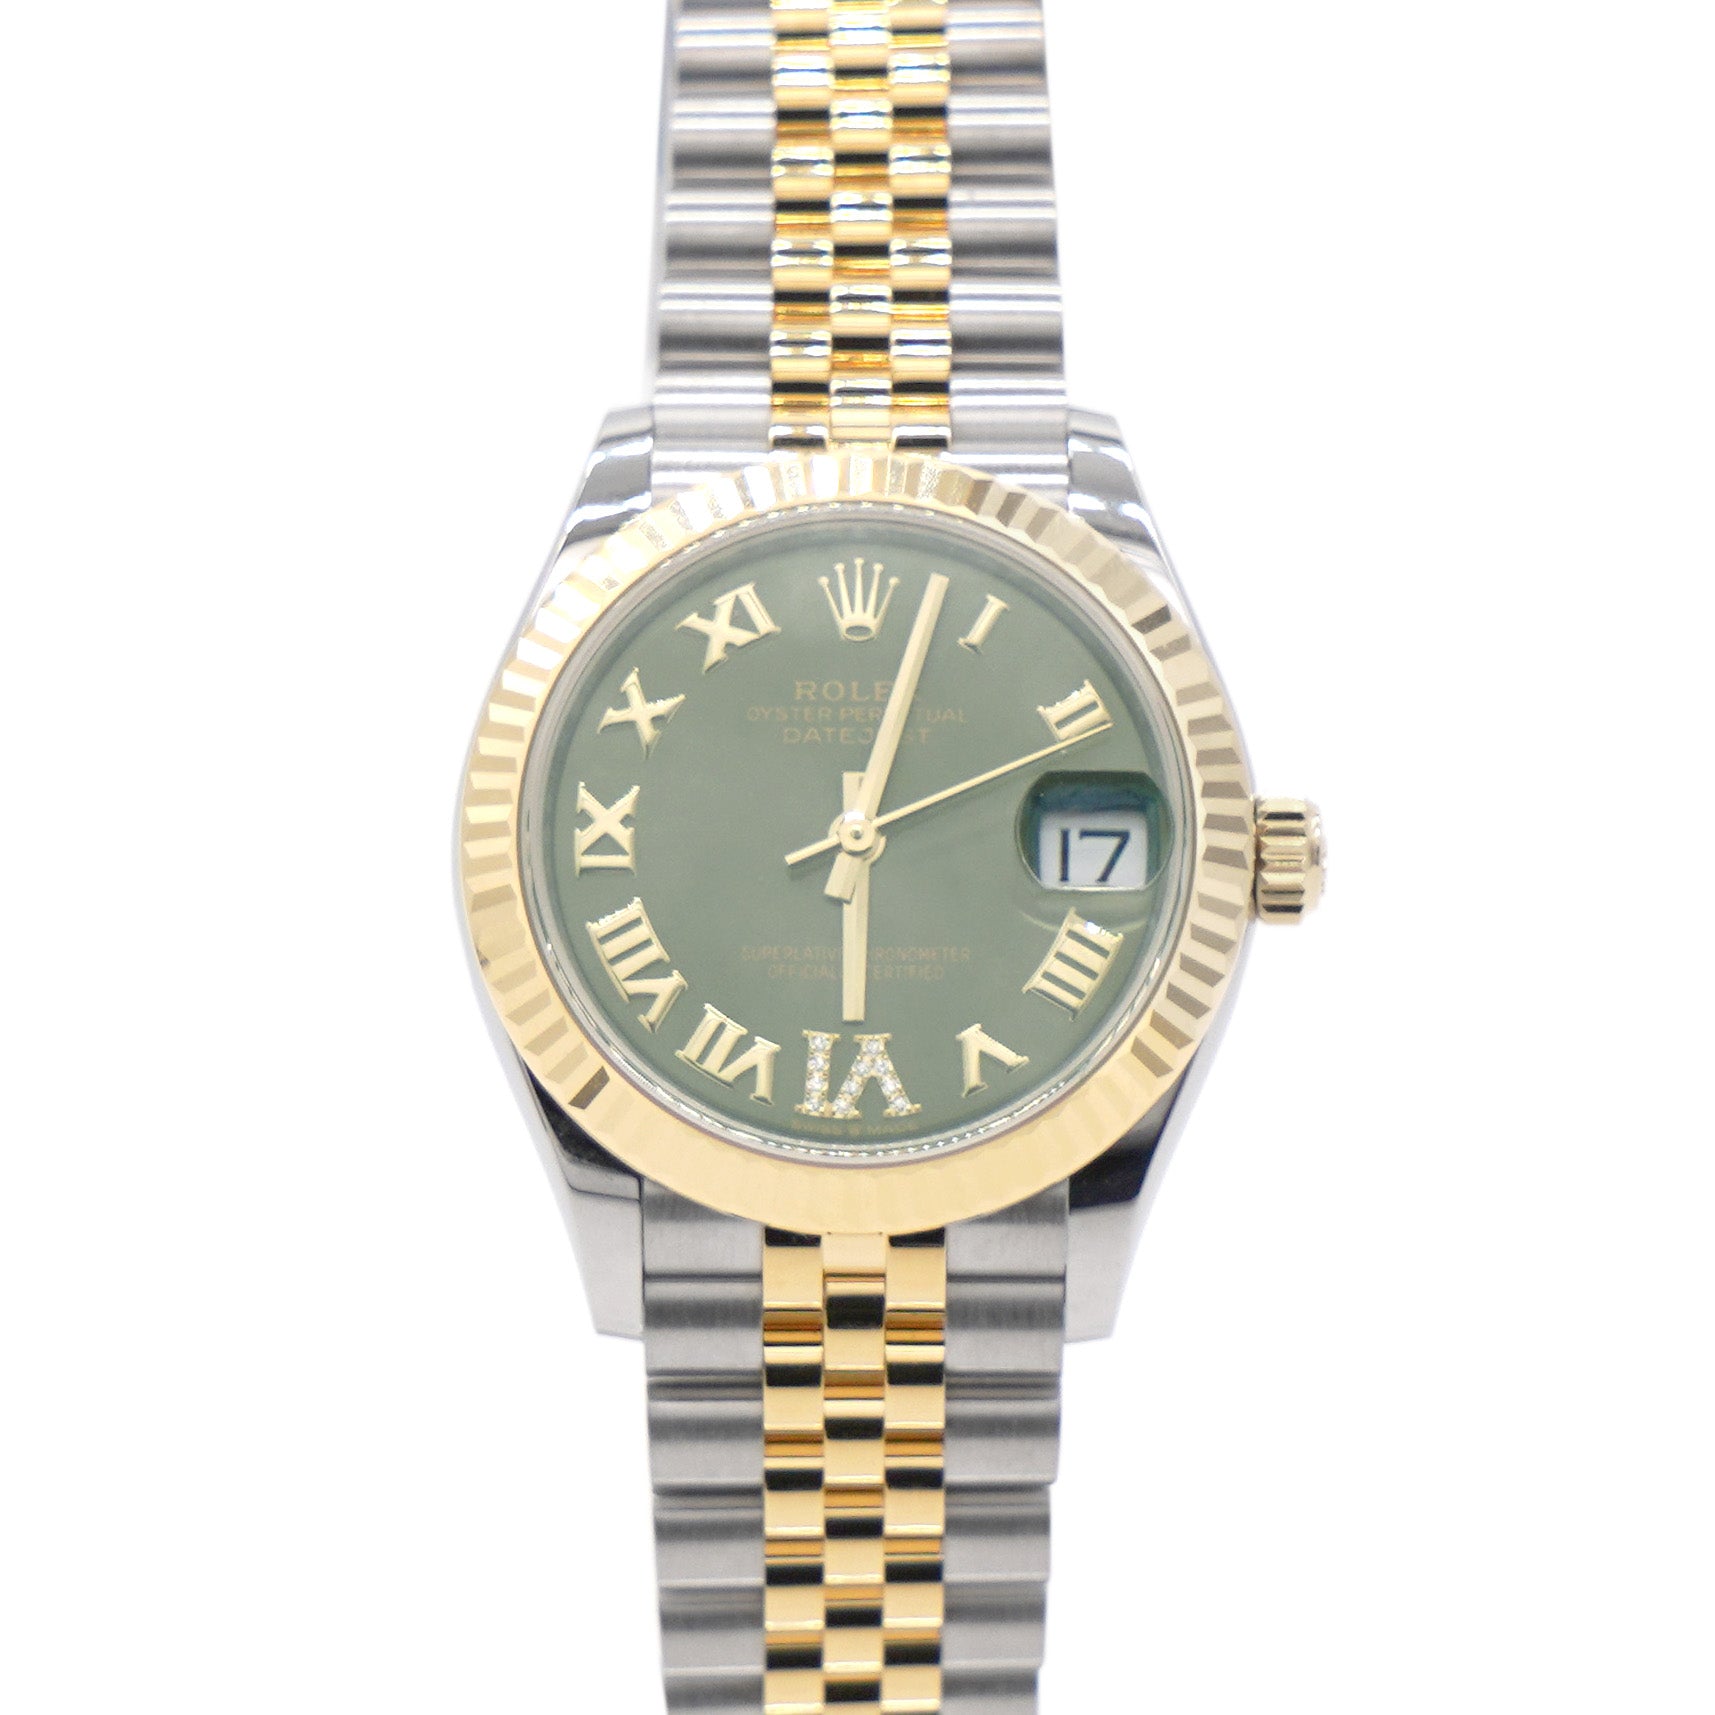 Datejust 31 Oystersteel Yellow Gold